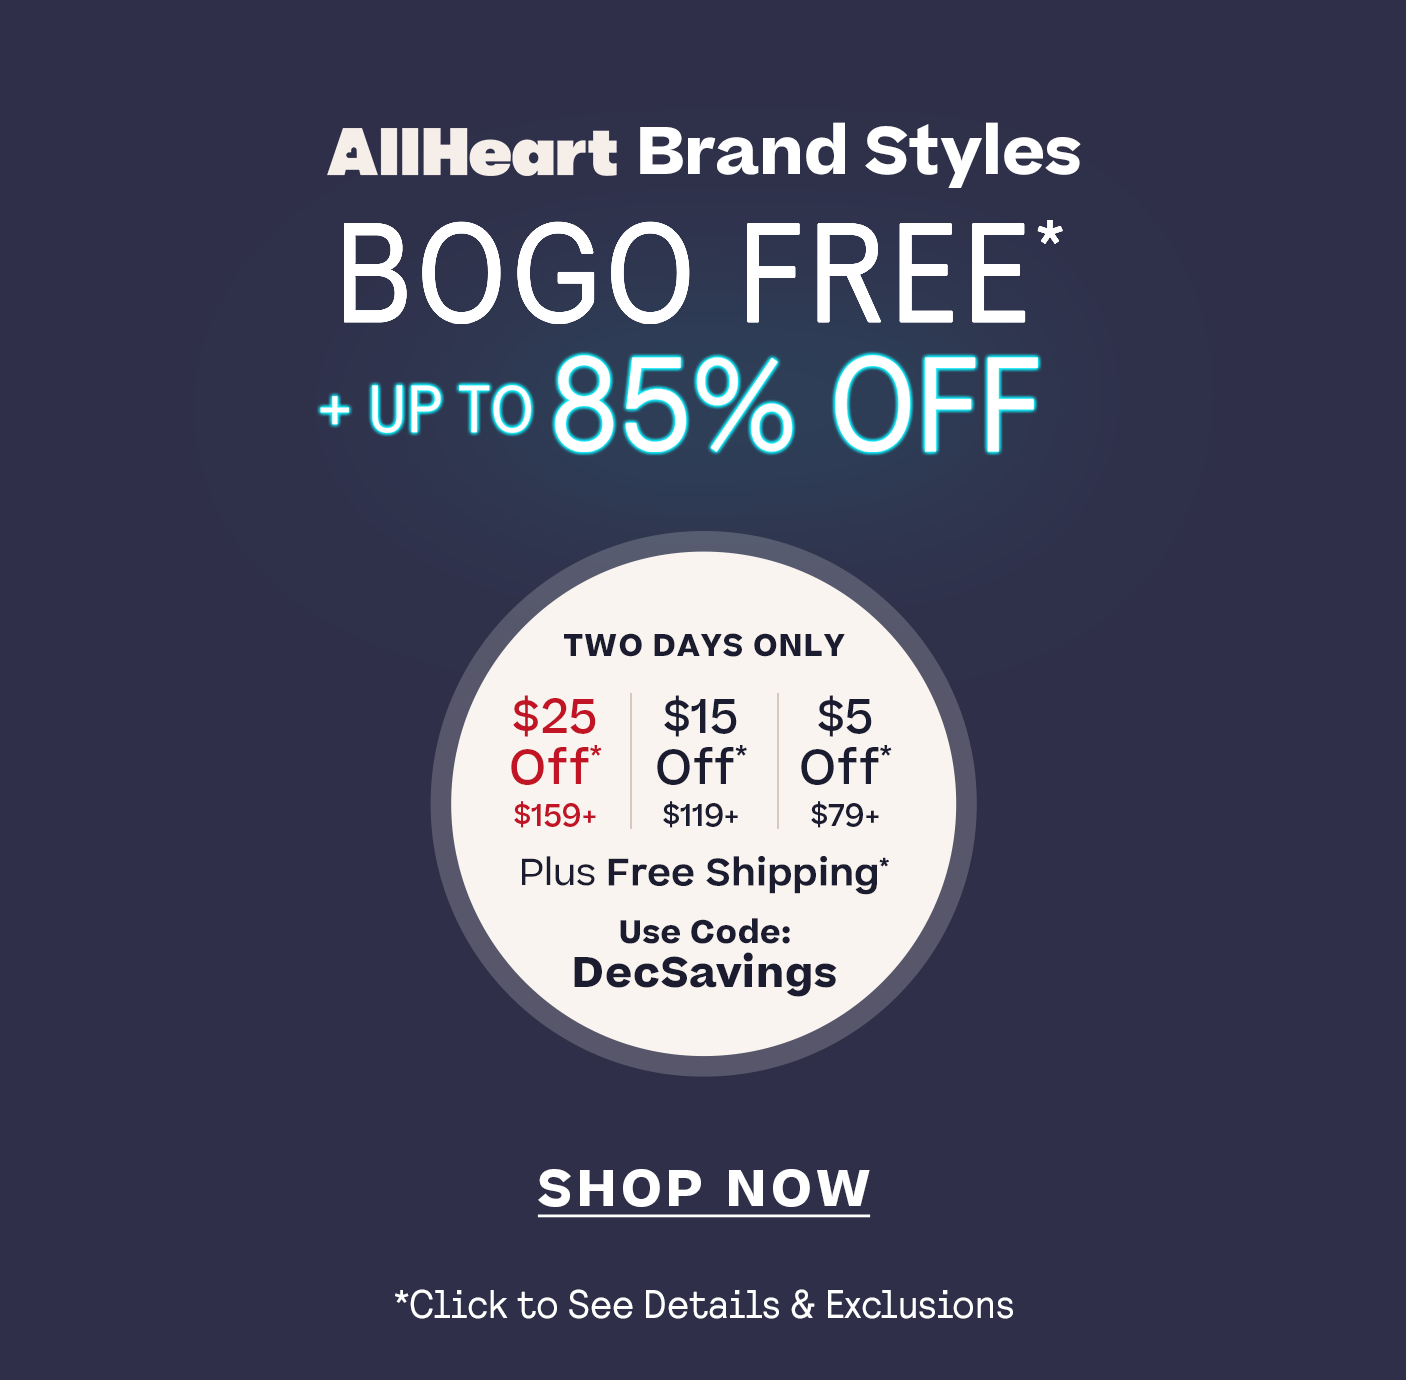 Sale plus BOGO Free $5 off $79+ | $15 off $119+ | $25 off $159+ Plus, Free Shipping* Code: DECSAVINGS click for details